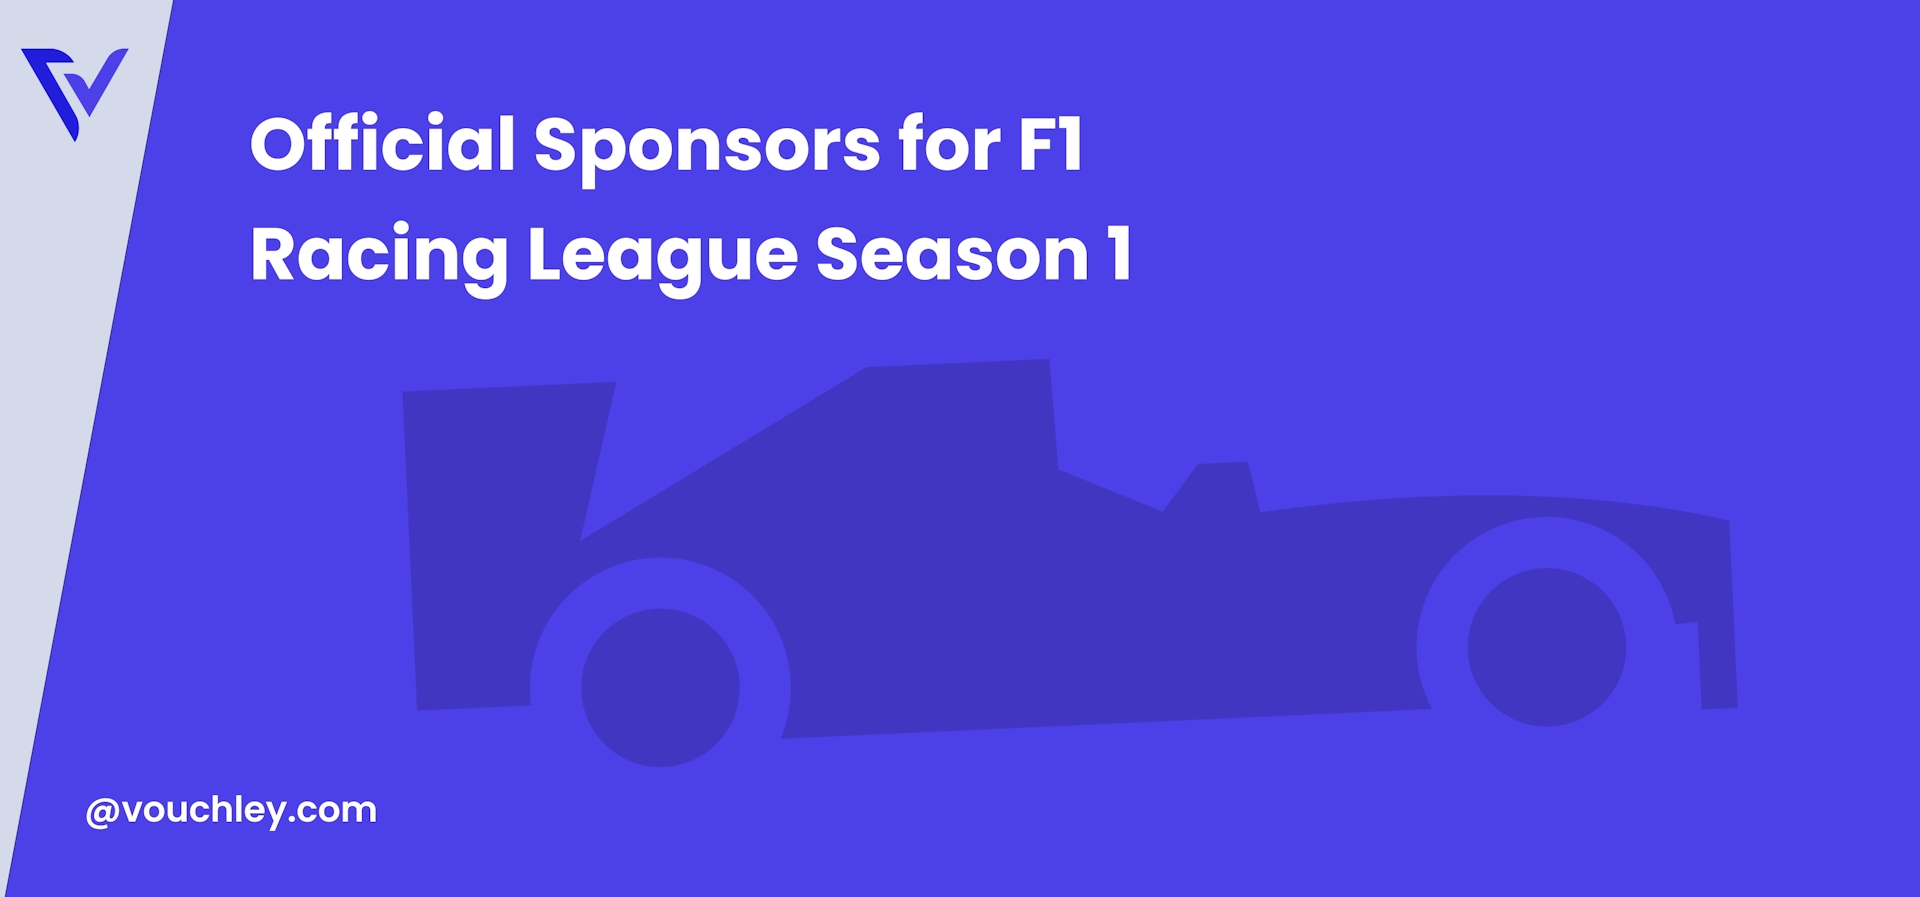 Vouchley Officially Sponsors Chalupa F1 Racing League, Season 1.